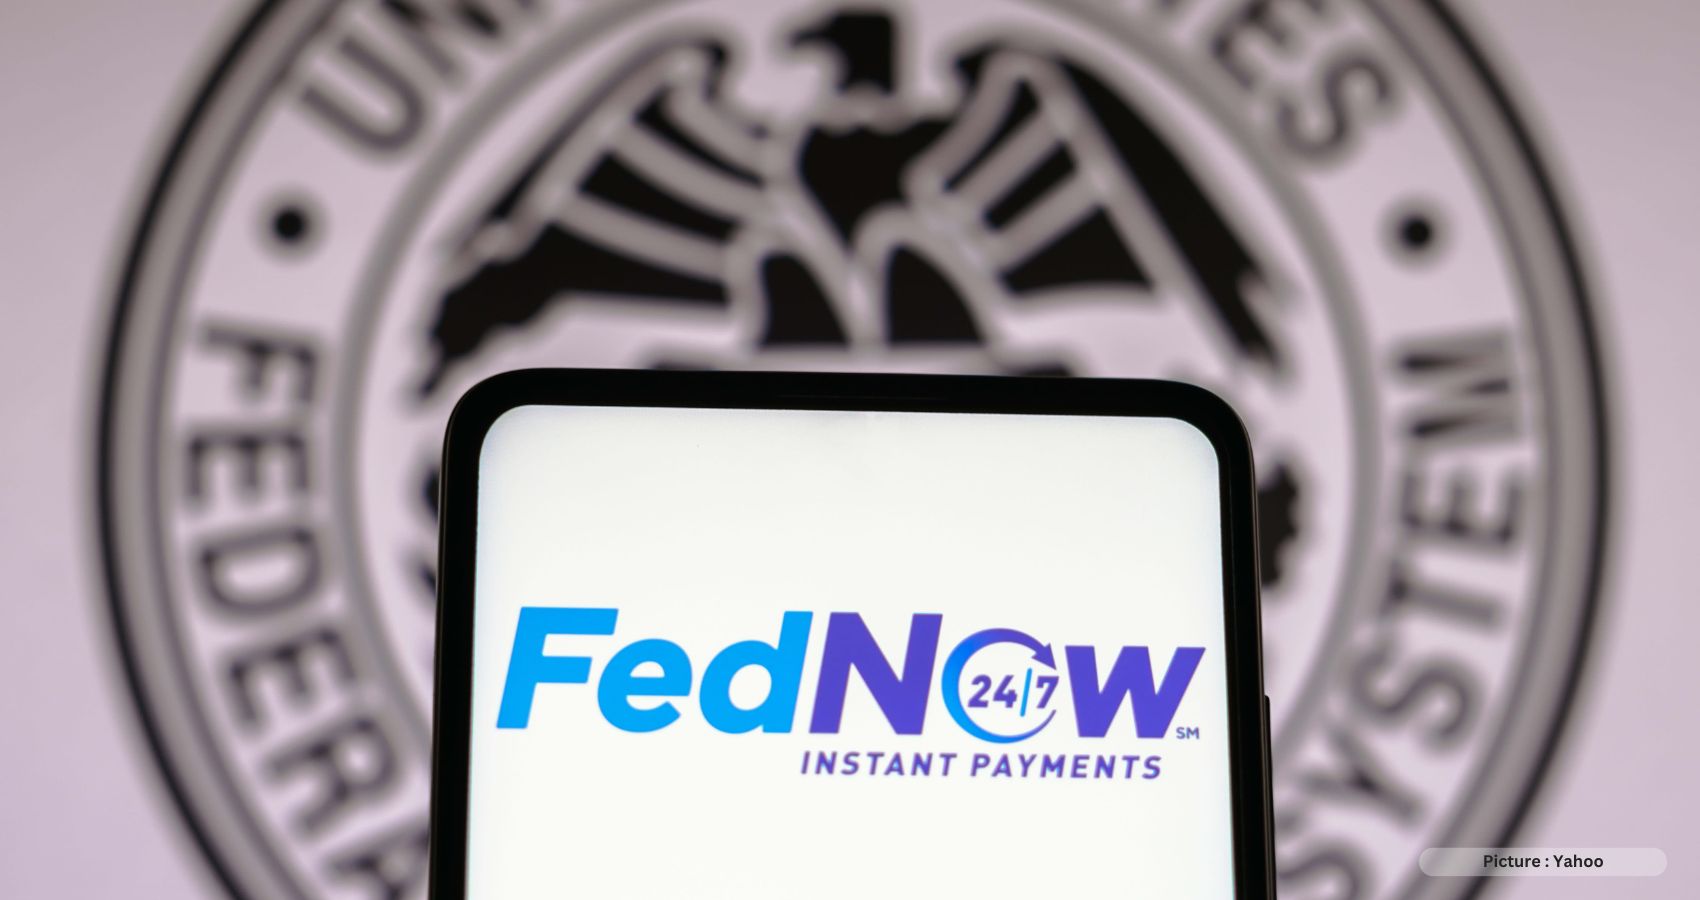 Fednow Instant Payment Service For Banks Launched